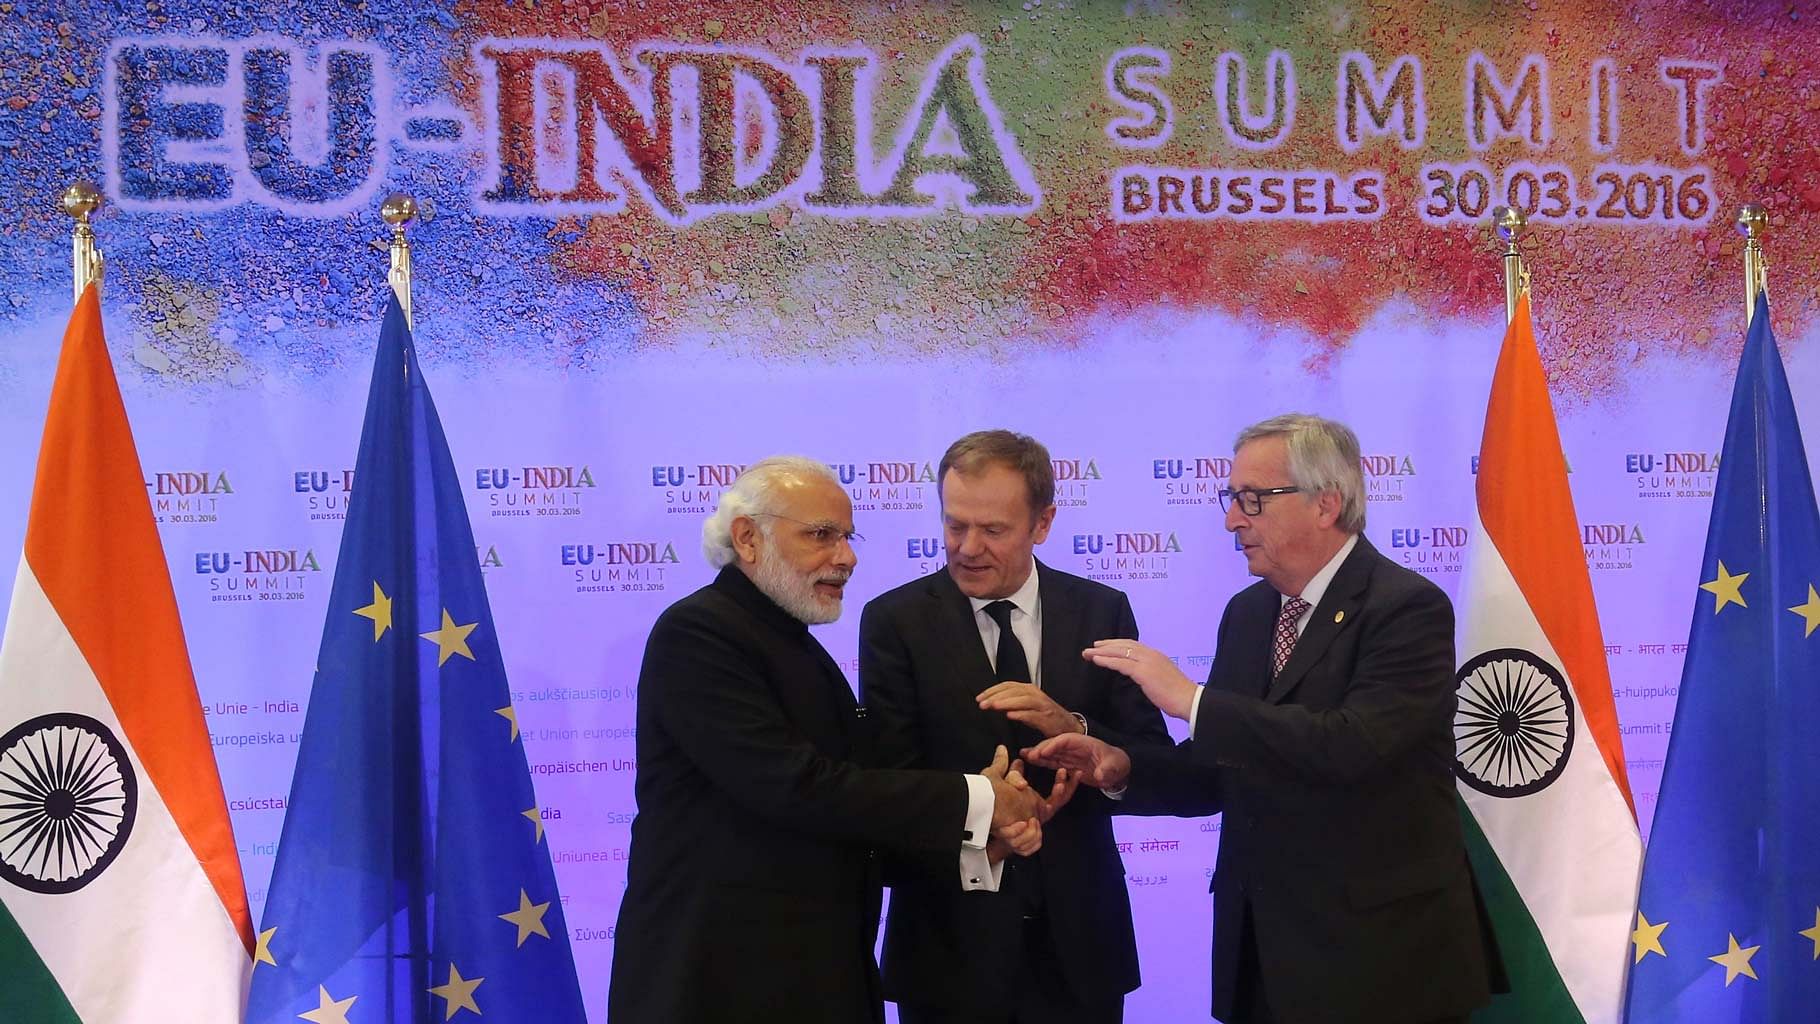 Prime Minister Narendra Modi with European Commission President Jean-Claude Juncker (right) and European Council President Donald Tusk at the EU-India summit at the EU Council building in Brussels, Wednesday, 30 March 2016. (Photo: AP)